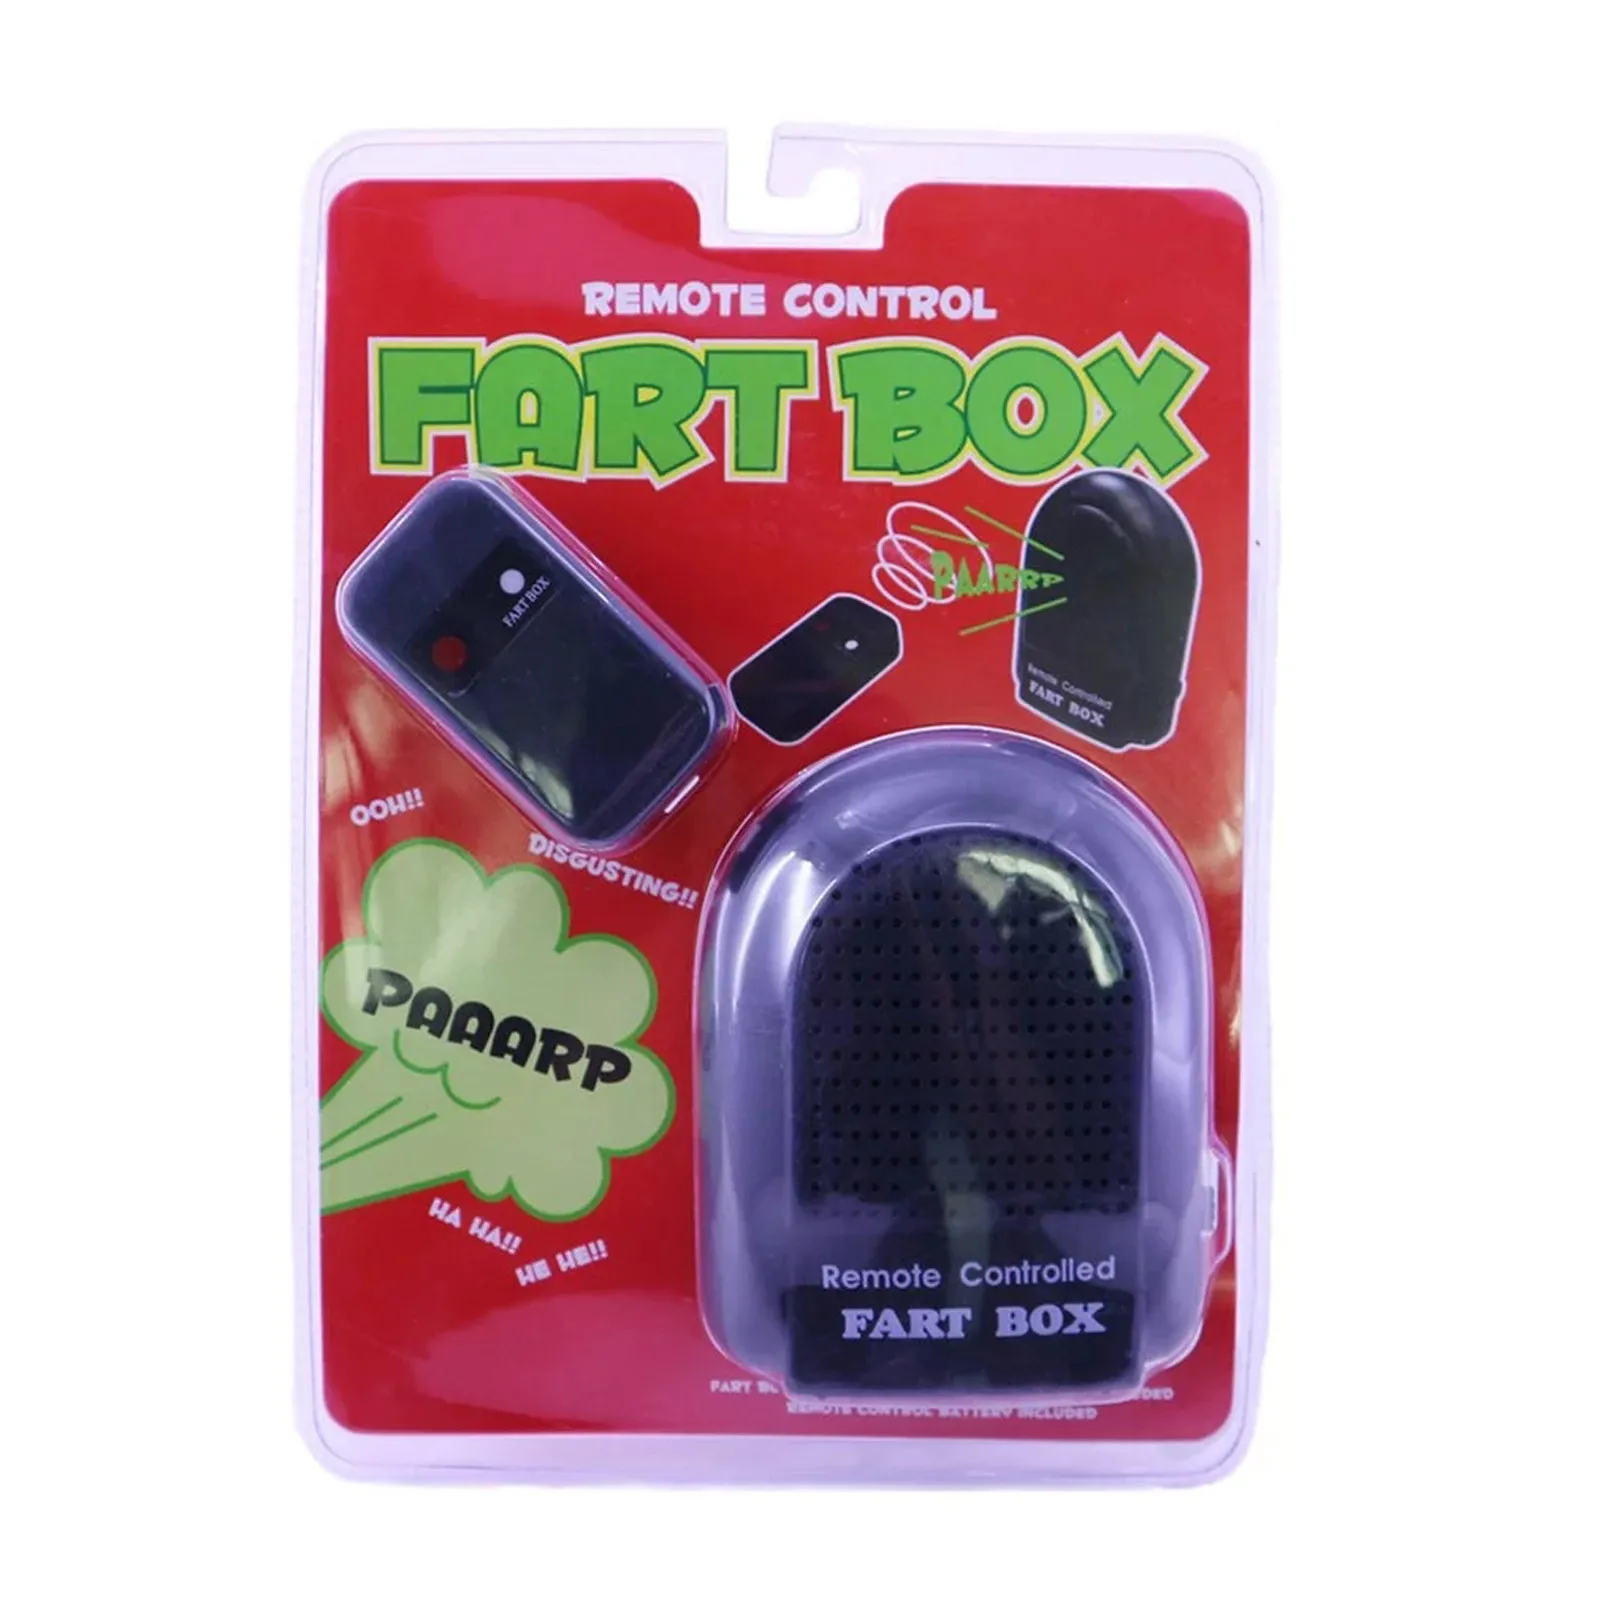 REMOTE CONTROLLED ELECTRONIC FART MACHINE BOX  FARTING SOUND FAMILY FUN 